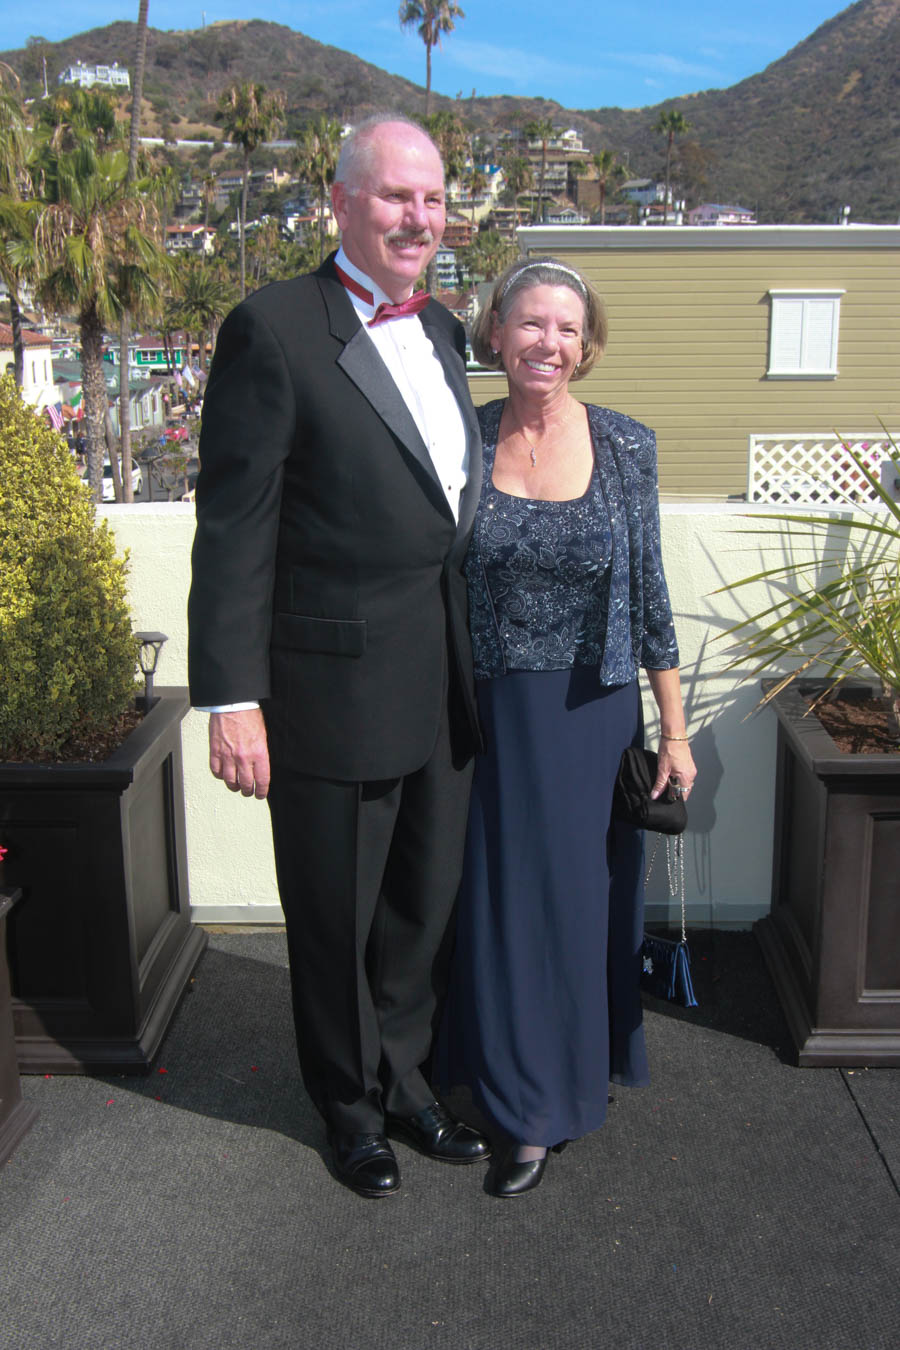 Avalon Ball portraits from up on the roof Saturday afternoon May 16th 2015